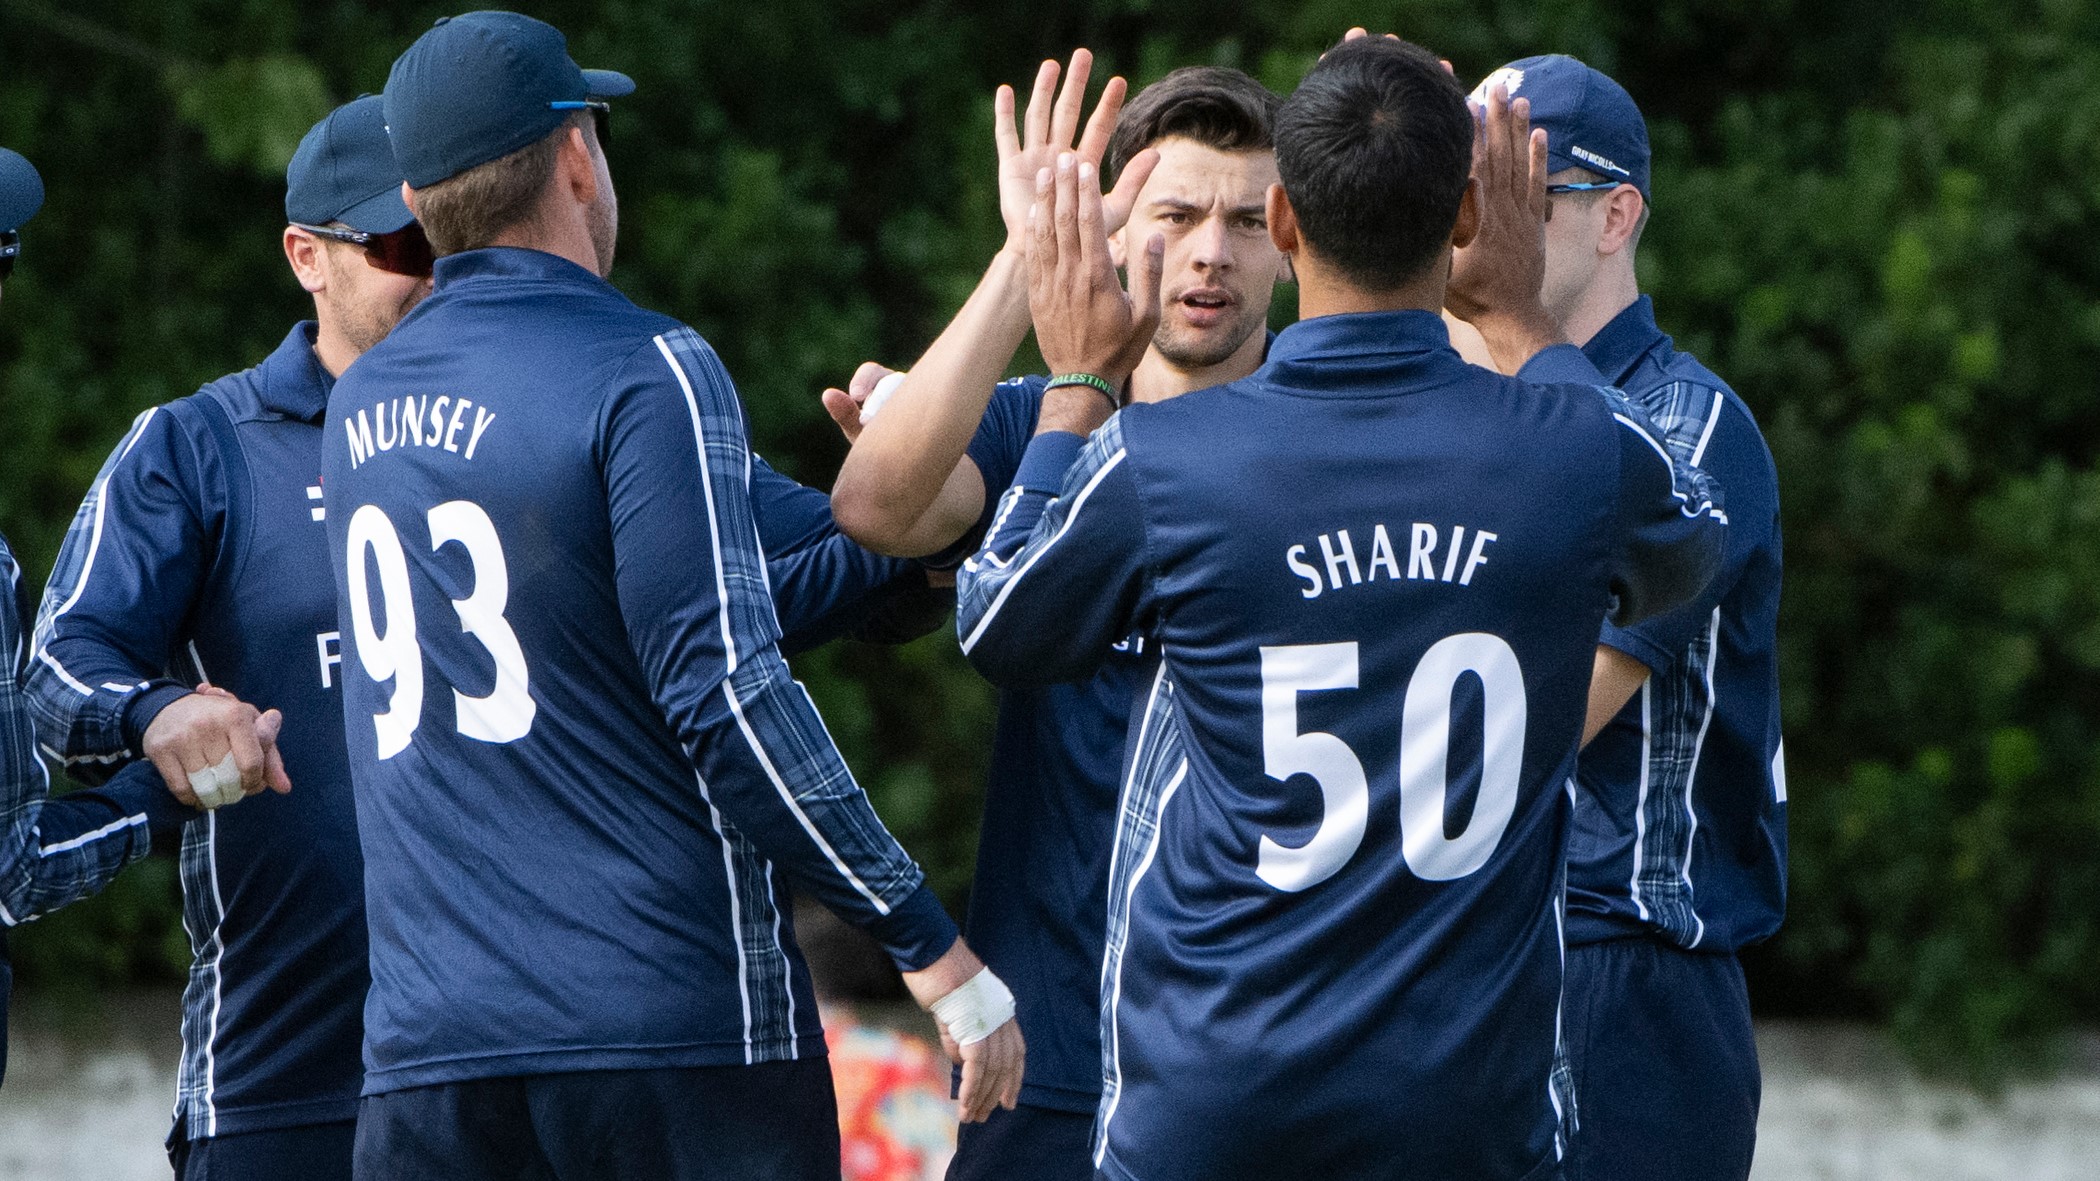 SCOTLAND SQUAD NAMED FOR ICC MEN’S T20 WORLD CUP